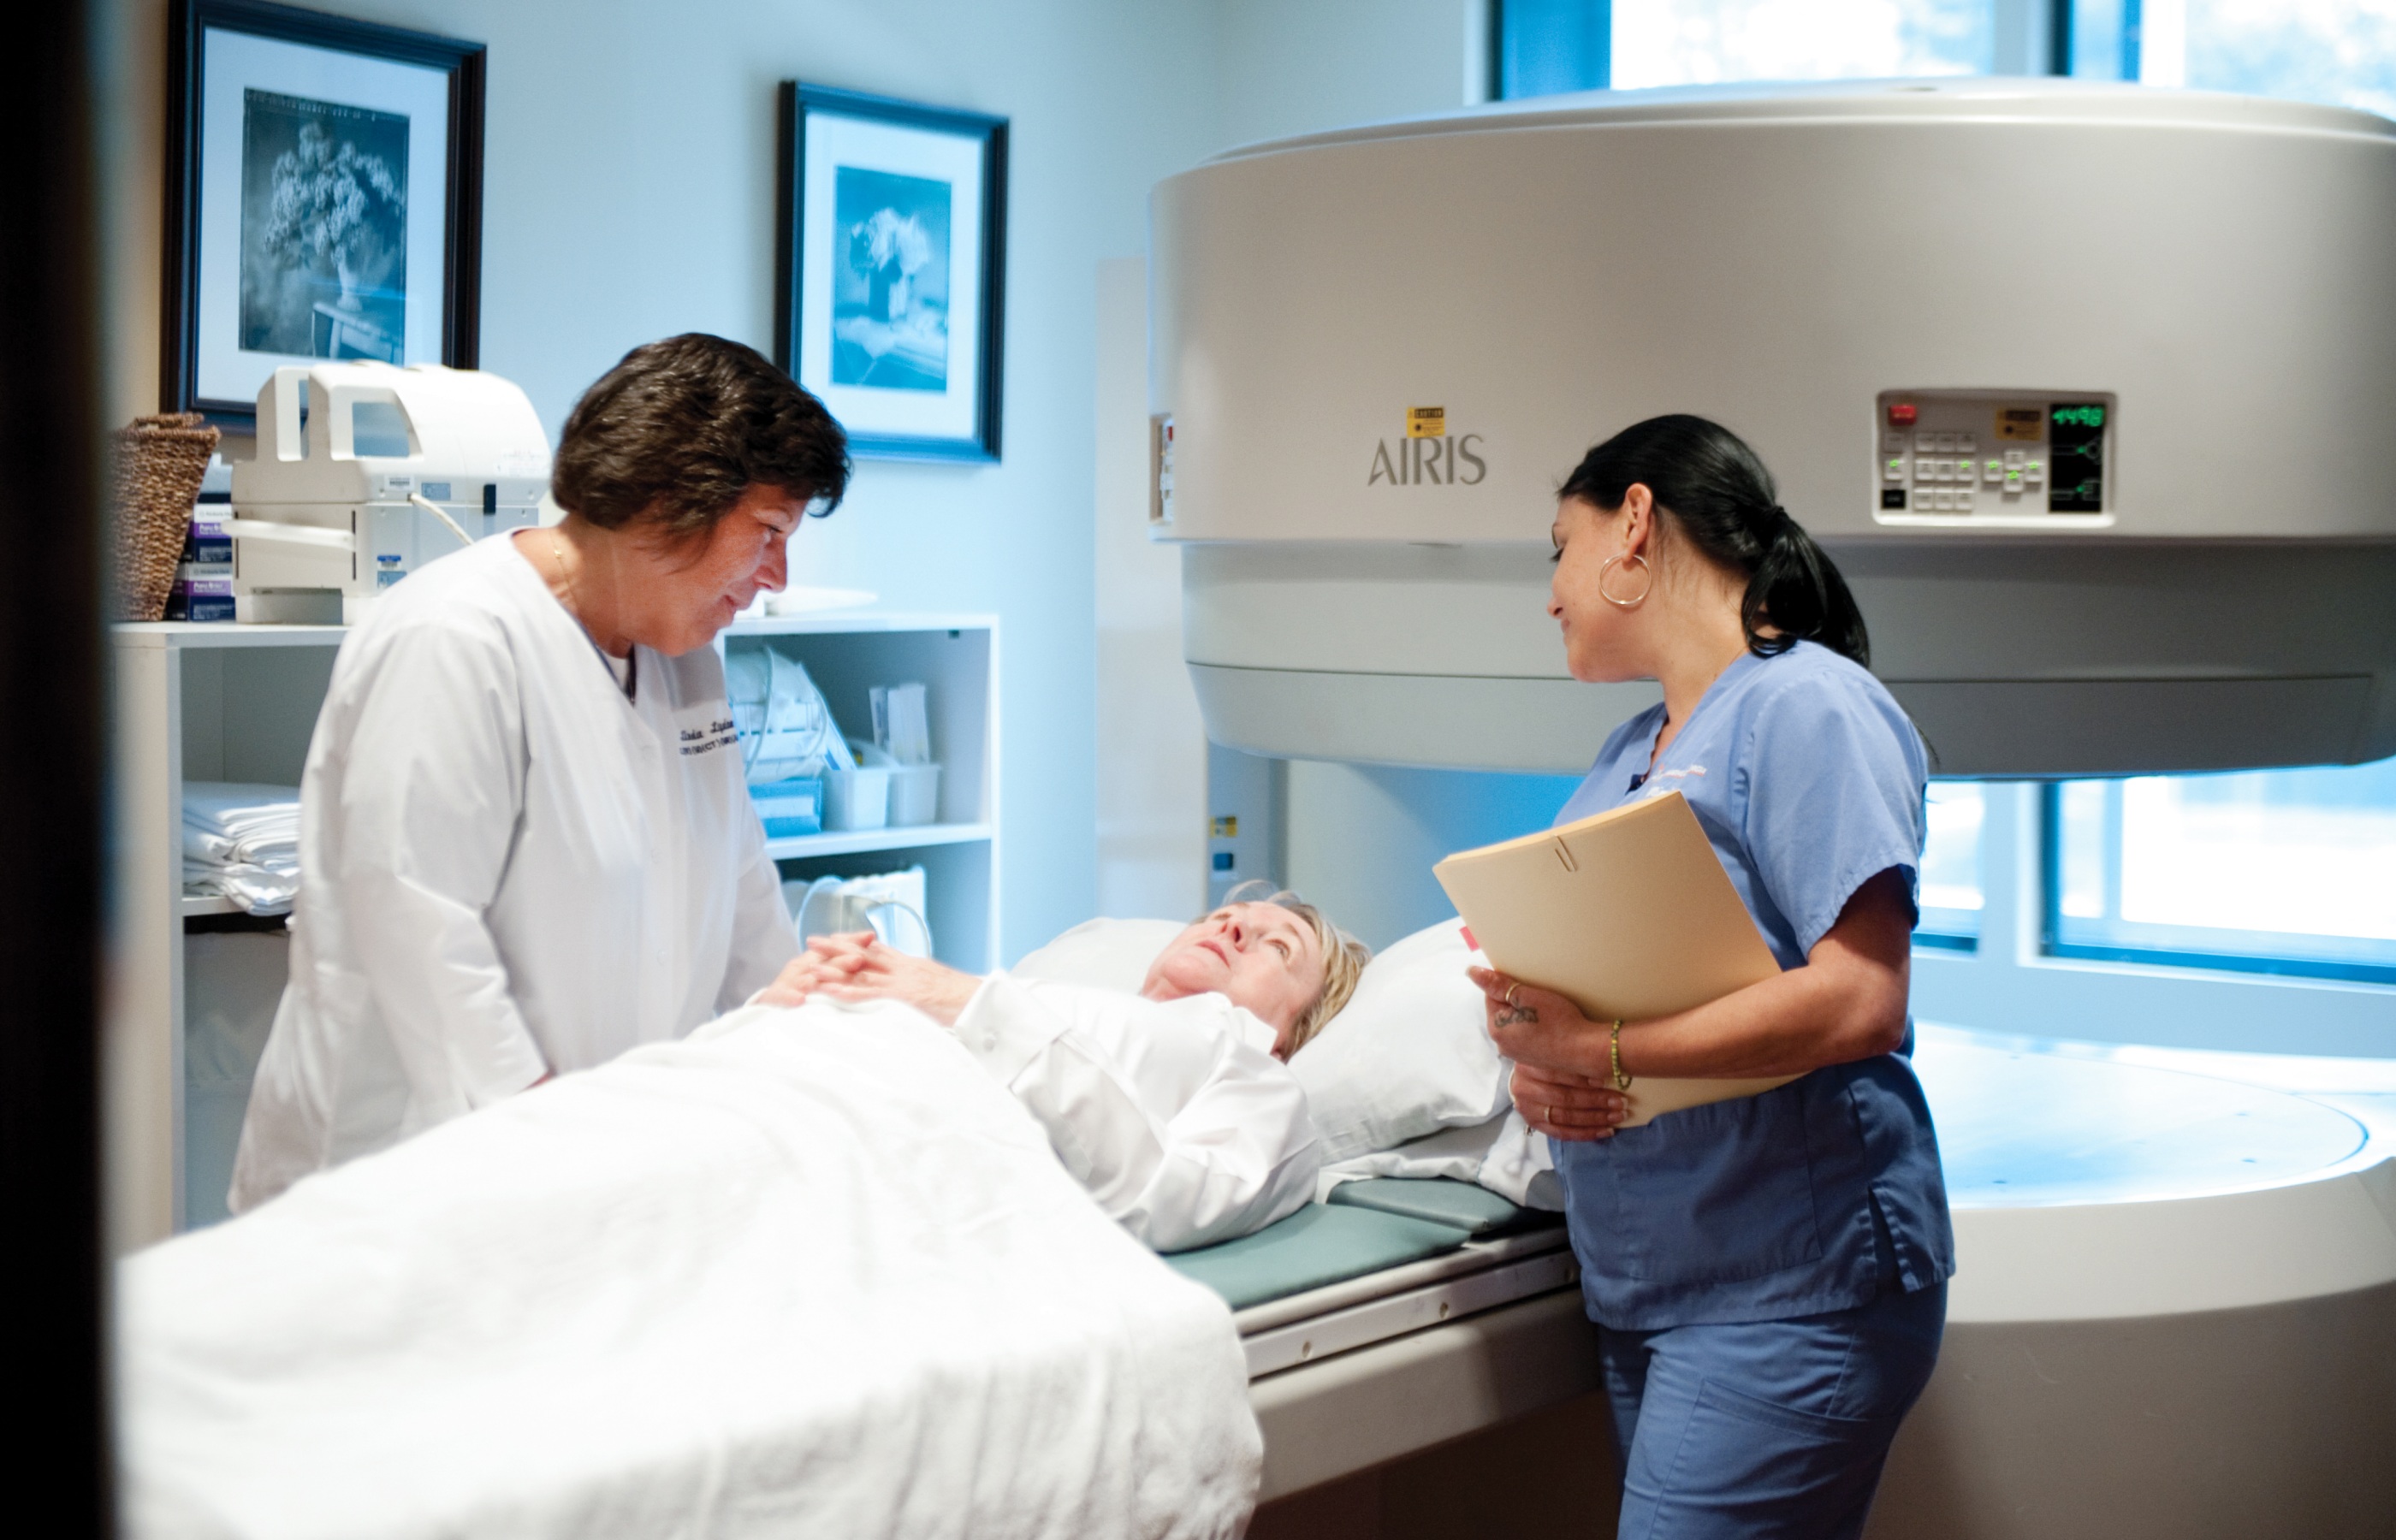 Two team members are talking with a patient as they prepare for an imaging scan.